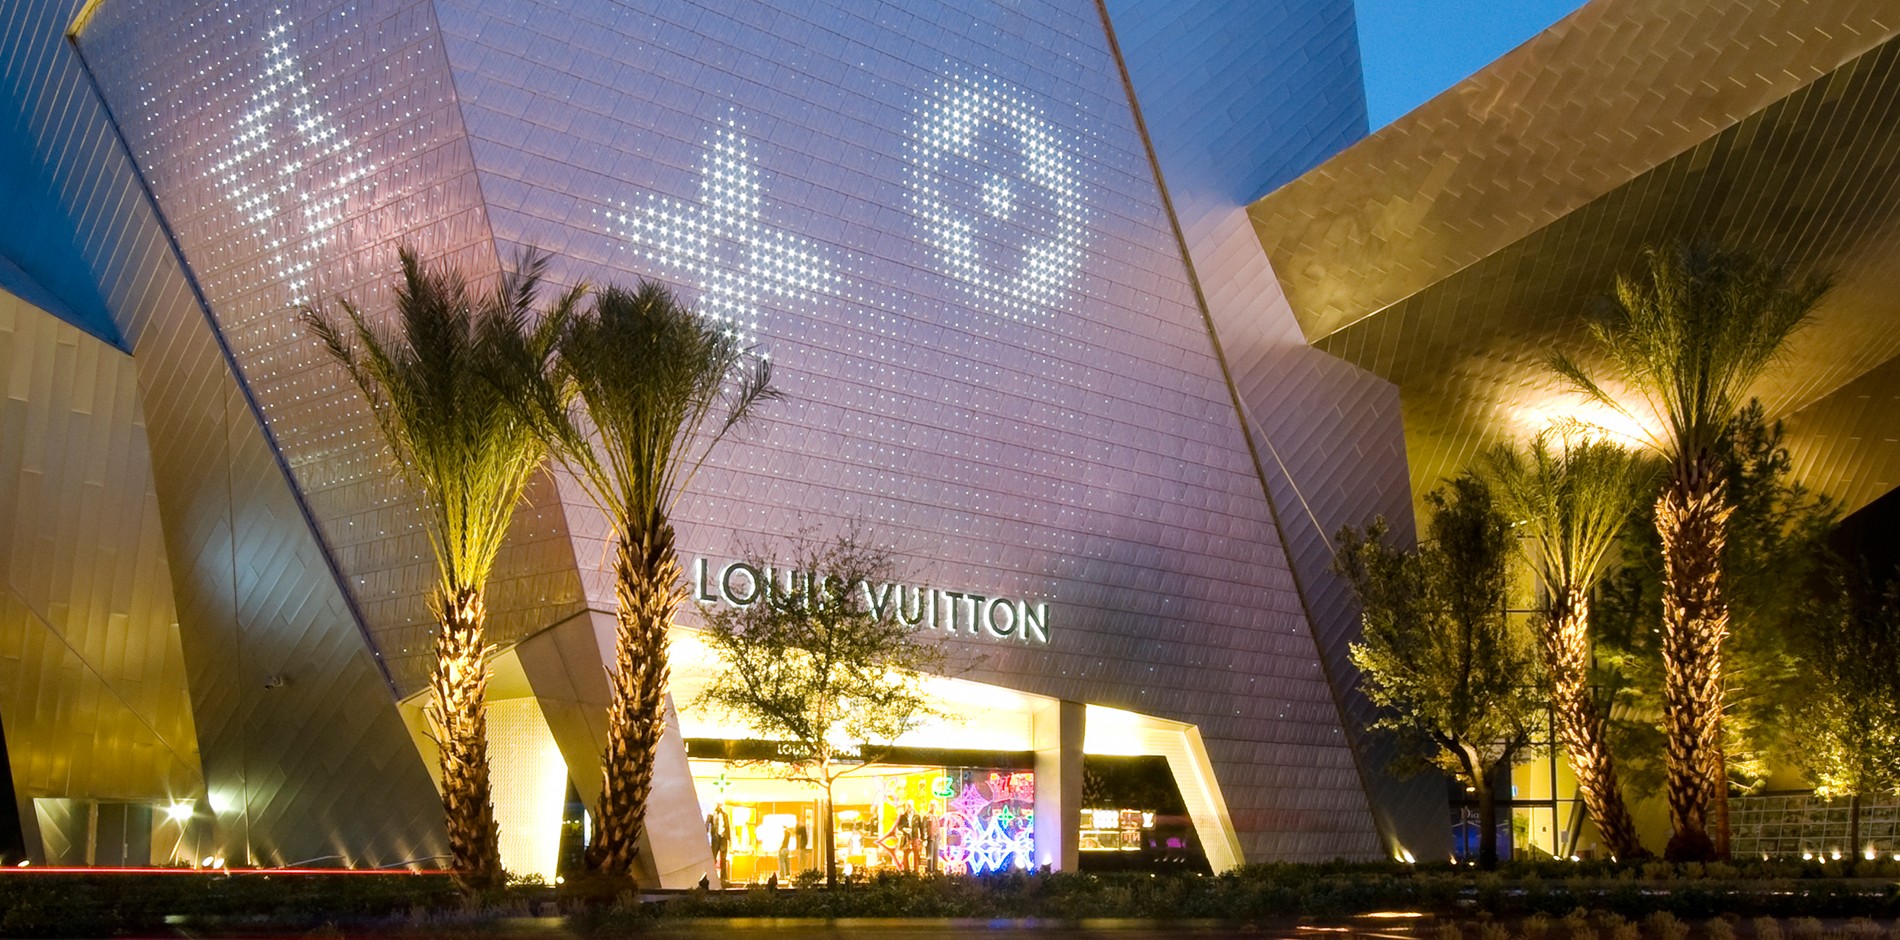 LAS VEGAS - MAY 21 : Exterior Of A Louis Vuitton Store In Las Vegas Strip  On May 21 , 2016. The Louis Vuitton Company Operates In 50 Countries With  More Than